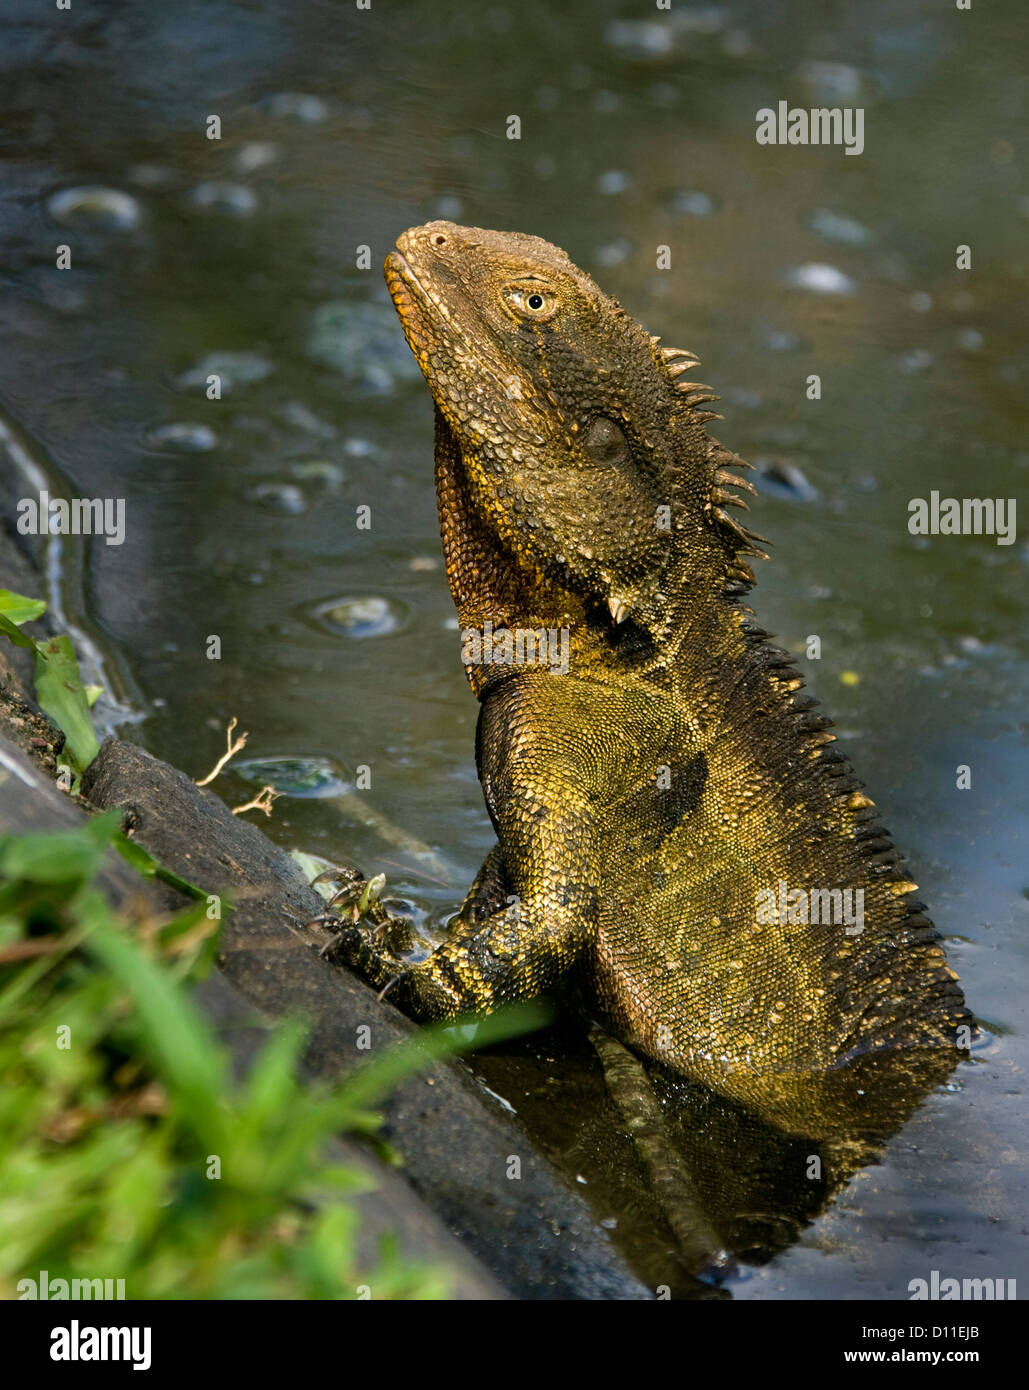 Eastern water dragon - Physignathus  lesueurii - an Australian lizard - climbing out of clear water by riverbank Stock Photo